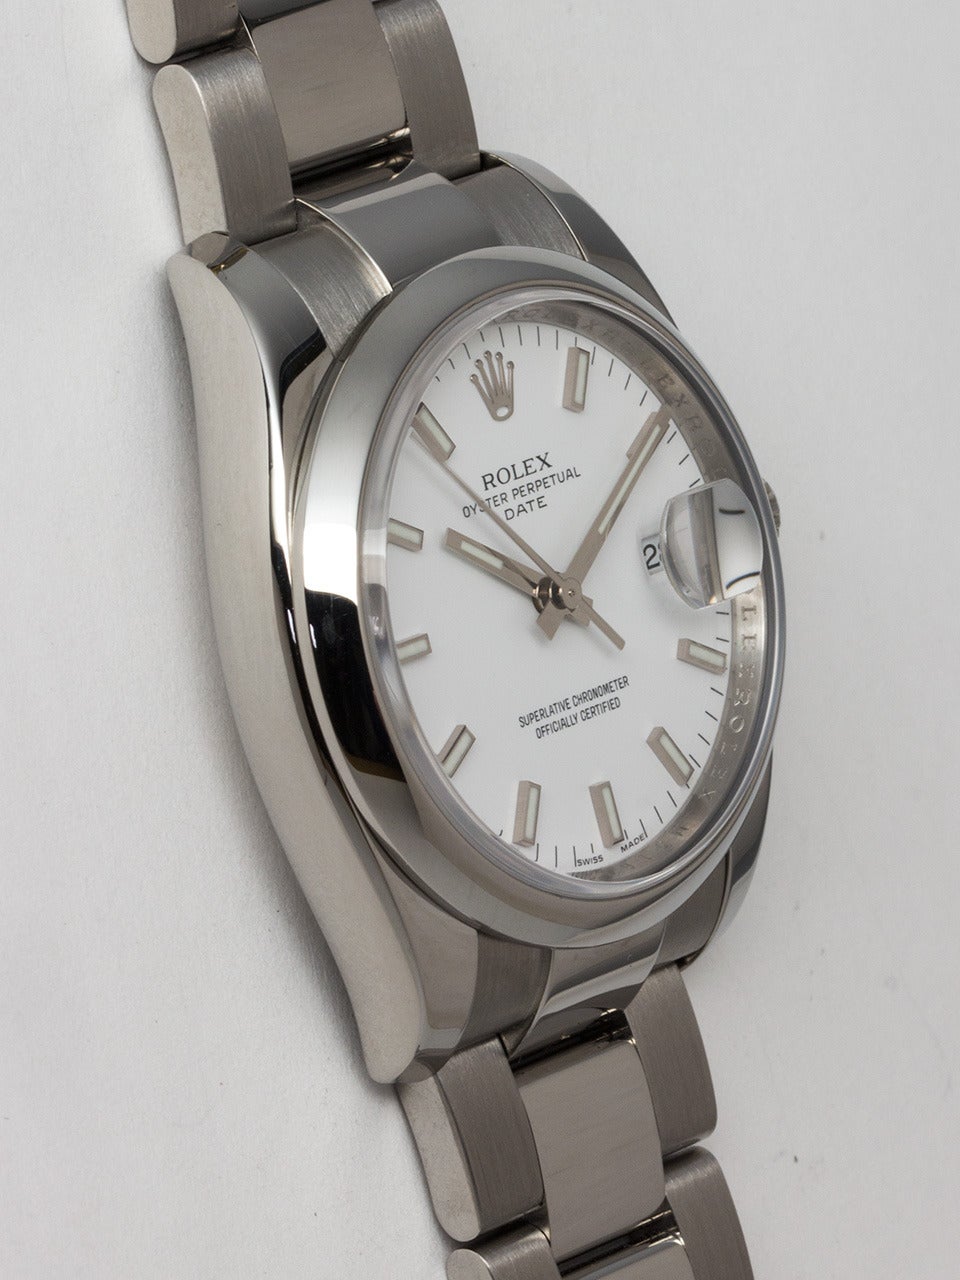 Rolex Stainless Steel Oyster Perpetual Date Wristwatch ref 115200 serial # M3 circa 2007. 34.5 mm diameter robust style case with smooth bezel and sapphire crystal. White enamel dial with wide luminous indexes and hands. Powered by caliber 3135 self